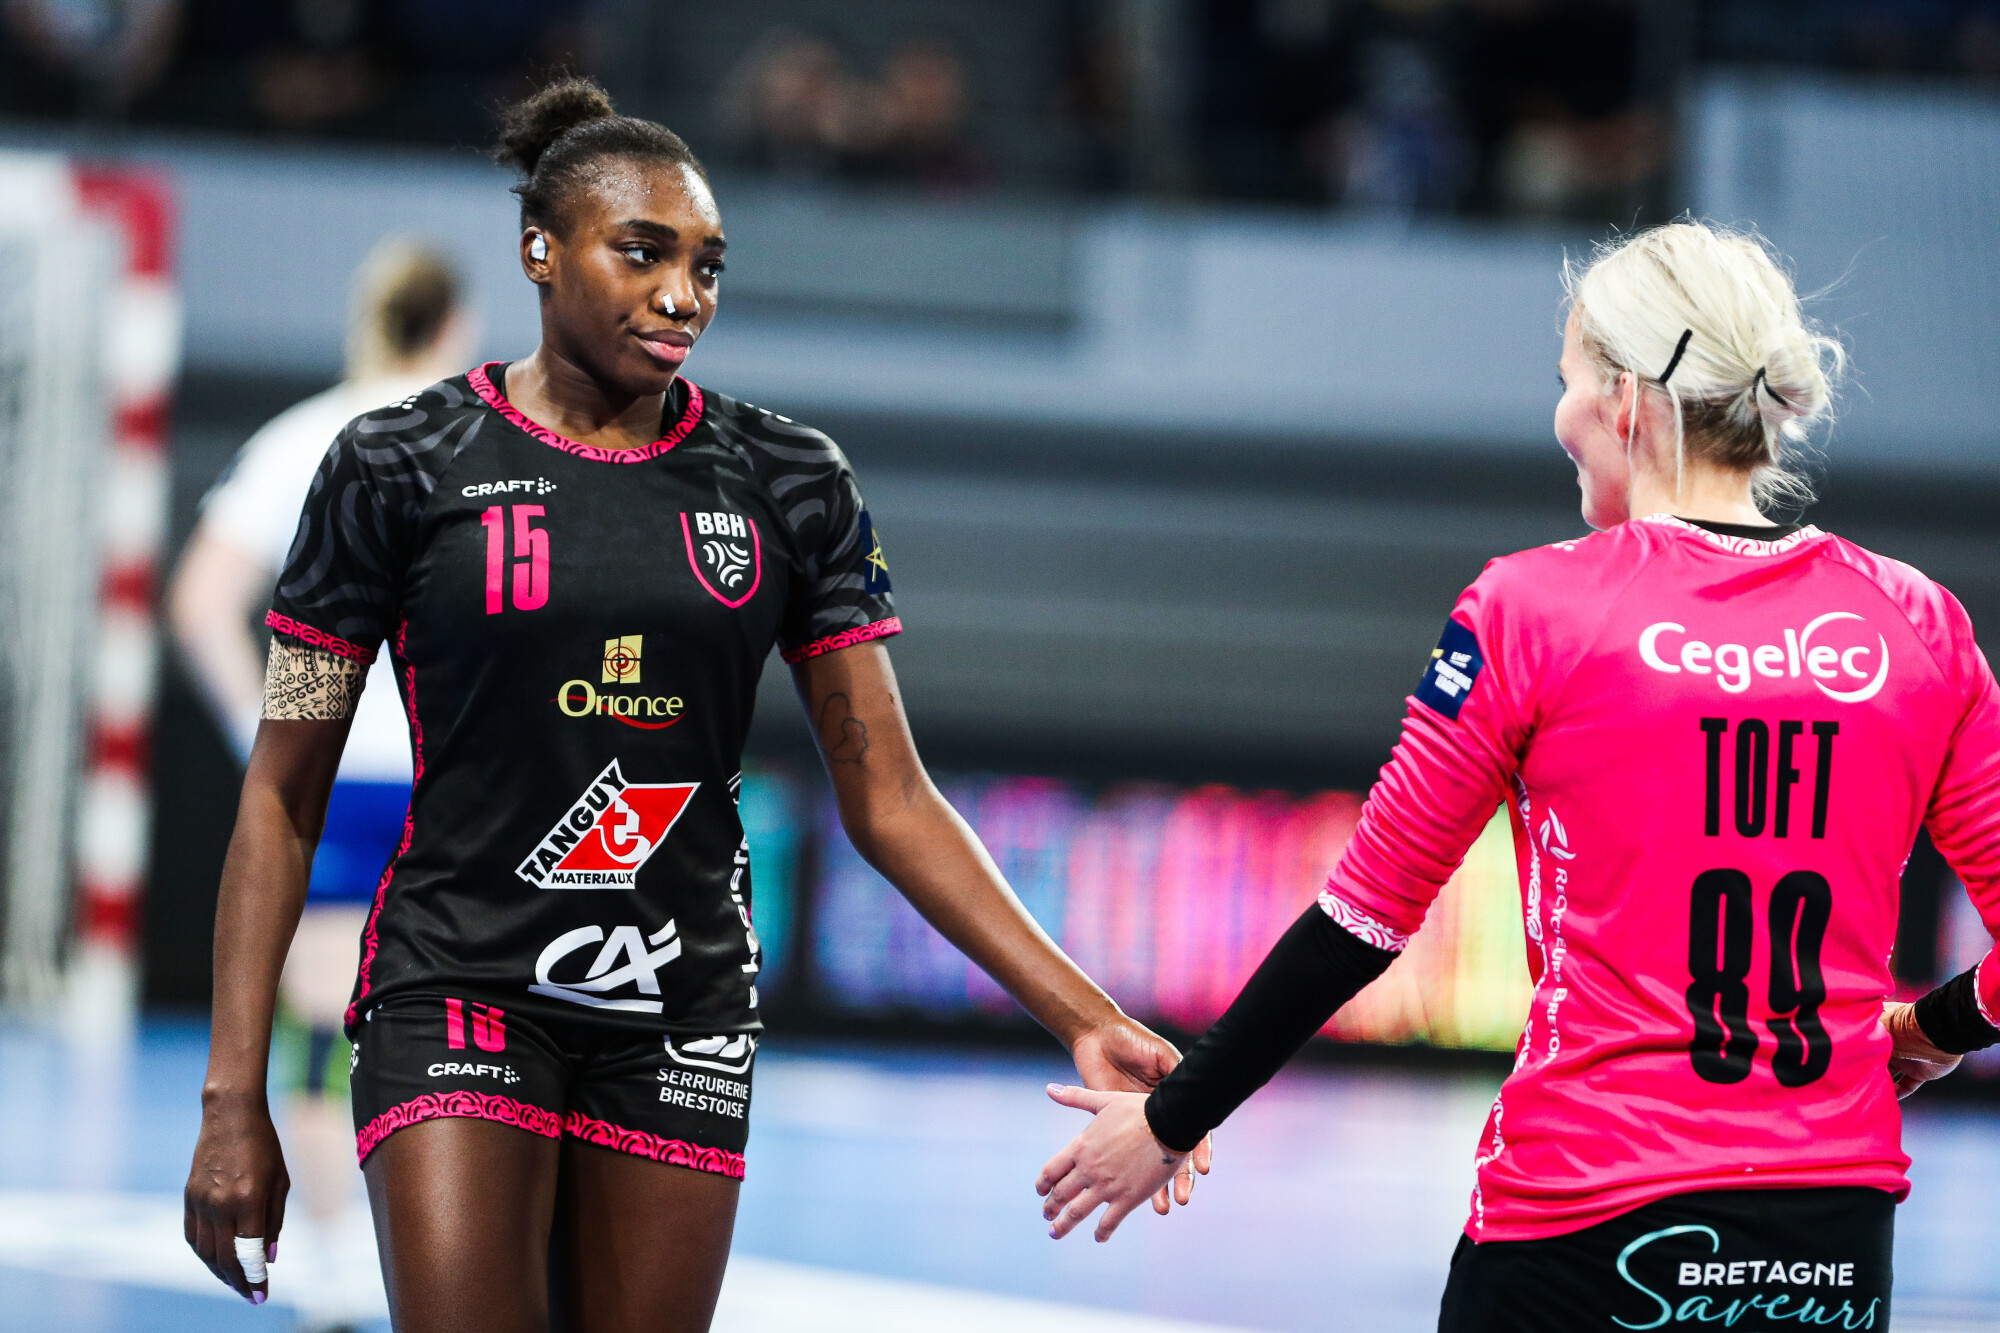 Kalidiatou NIAKATE of Brest and Sandra TOFT of Brest during the EHF Women's Champions League match between Brest and Podgorica on November 13, 2021 in Brest, France. (Photo by Maxime Le Pihif/Icon Sport)